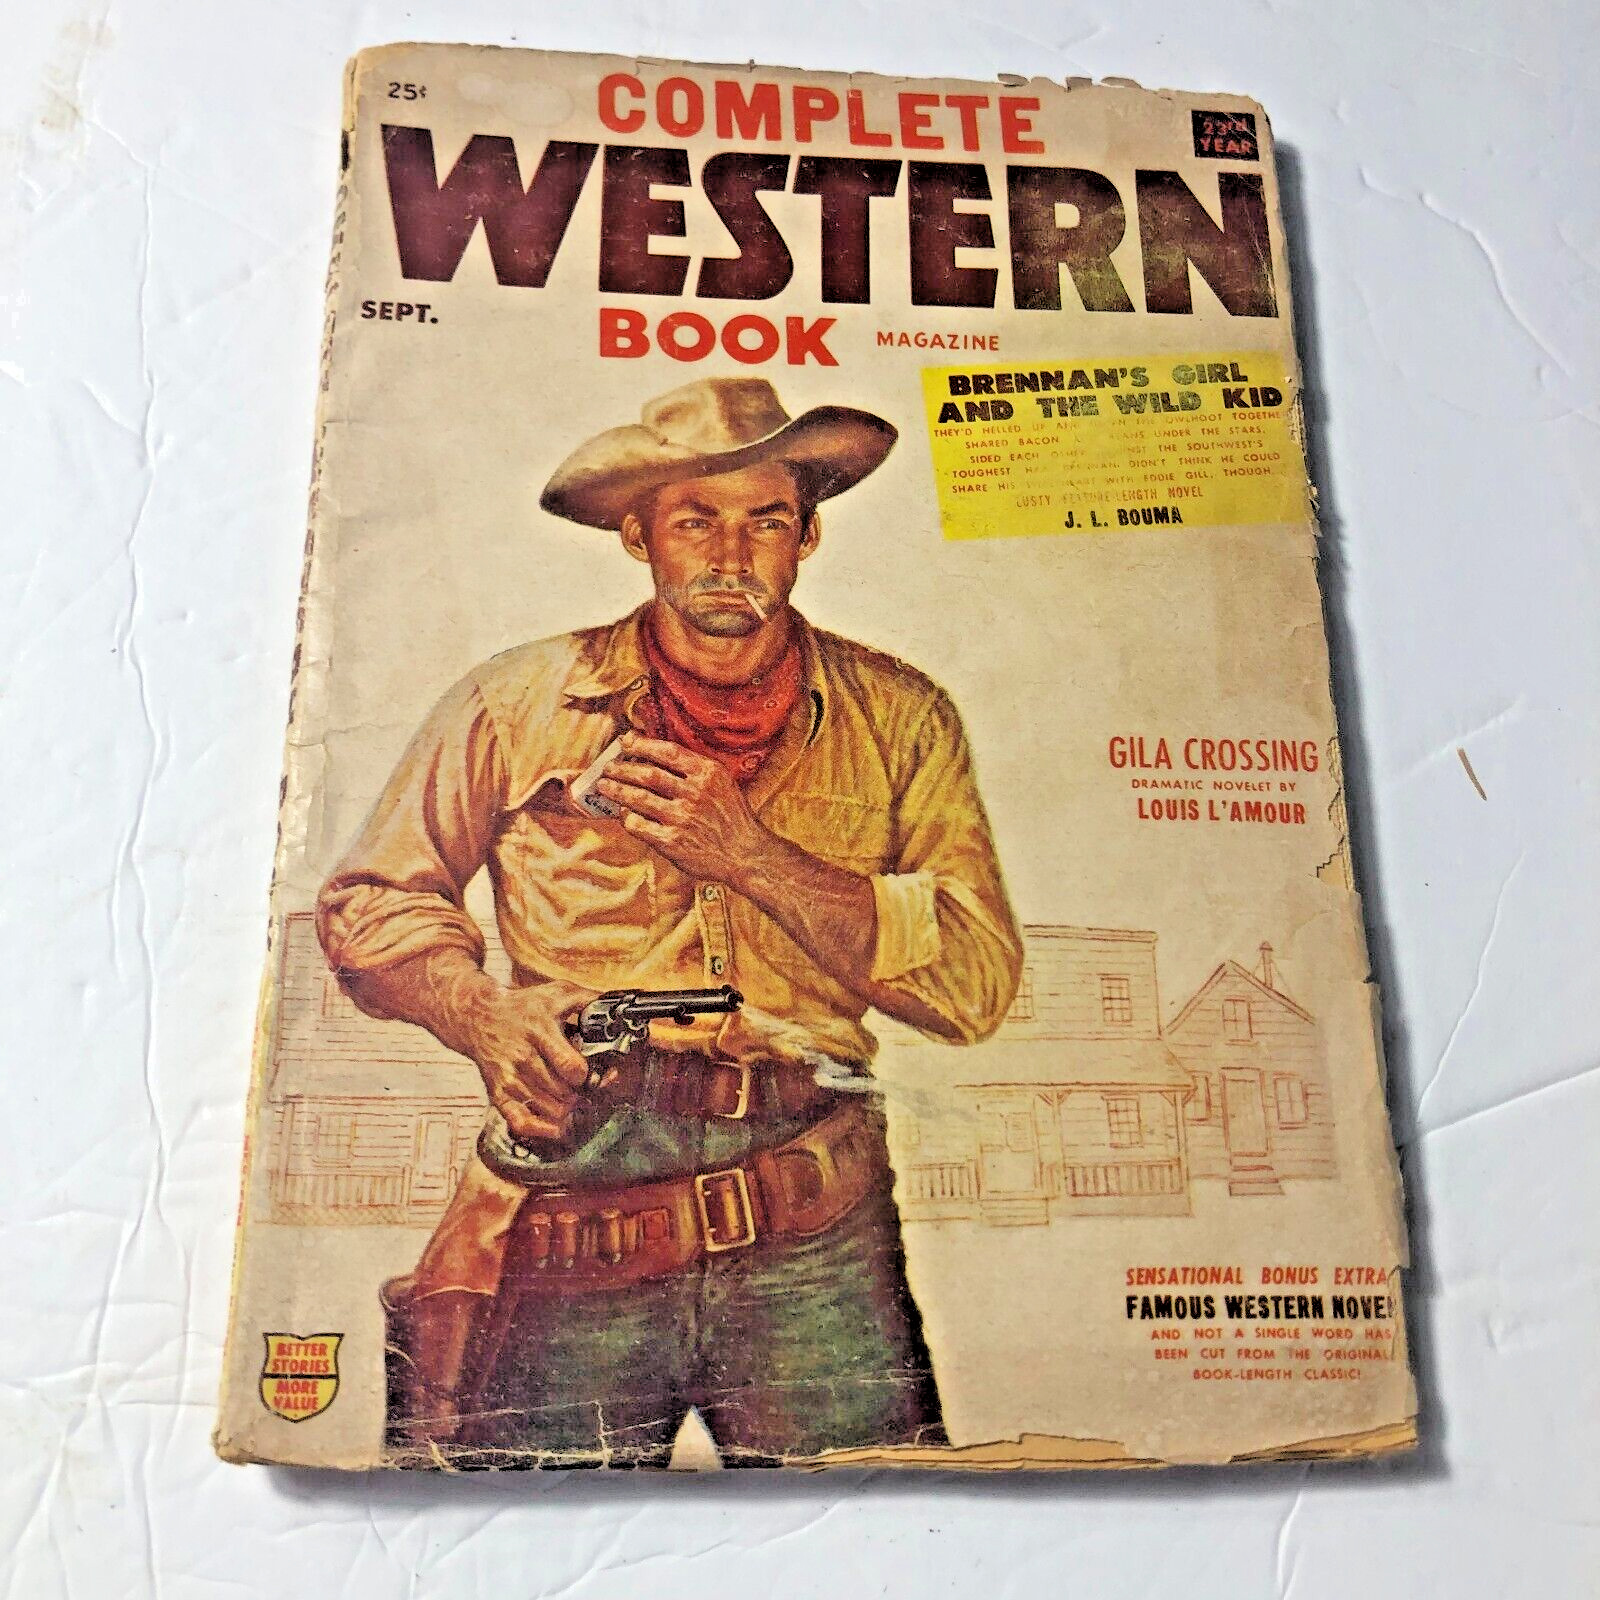 COMPLETE WESTERN BOOK, magazine September 1956, Vol 21 No 2, Louis L\'Amour